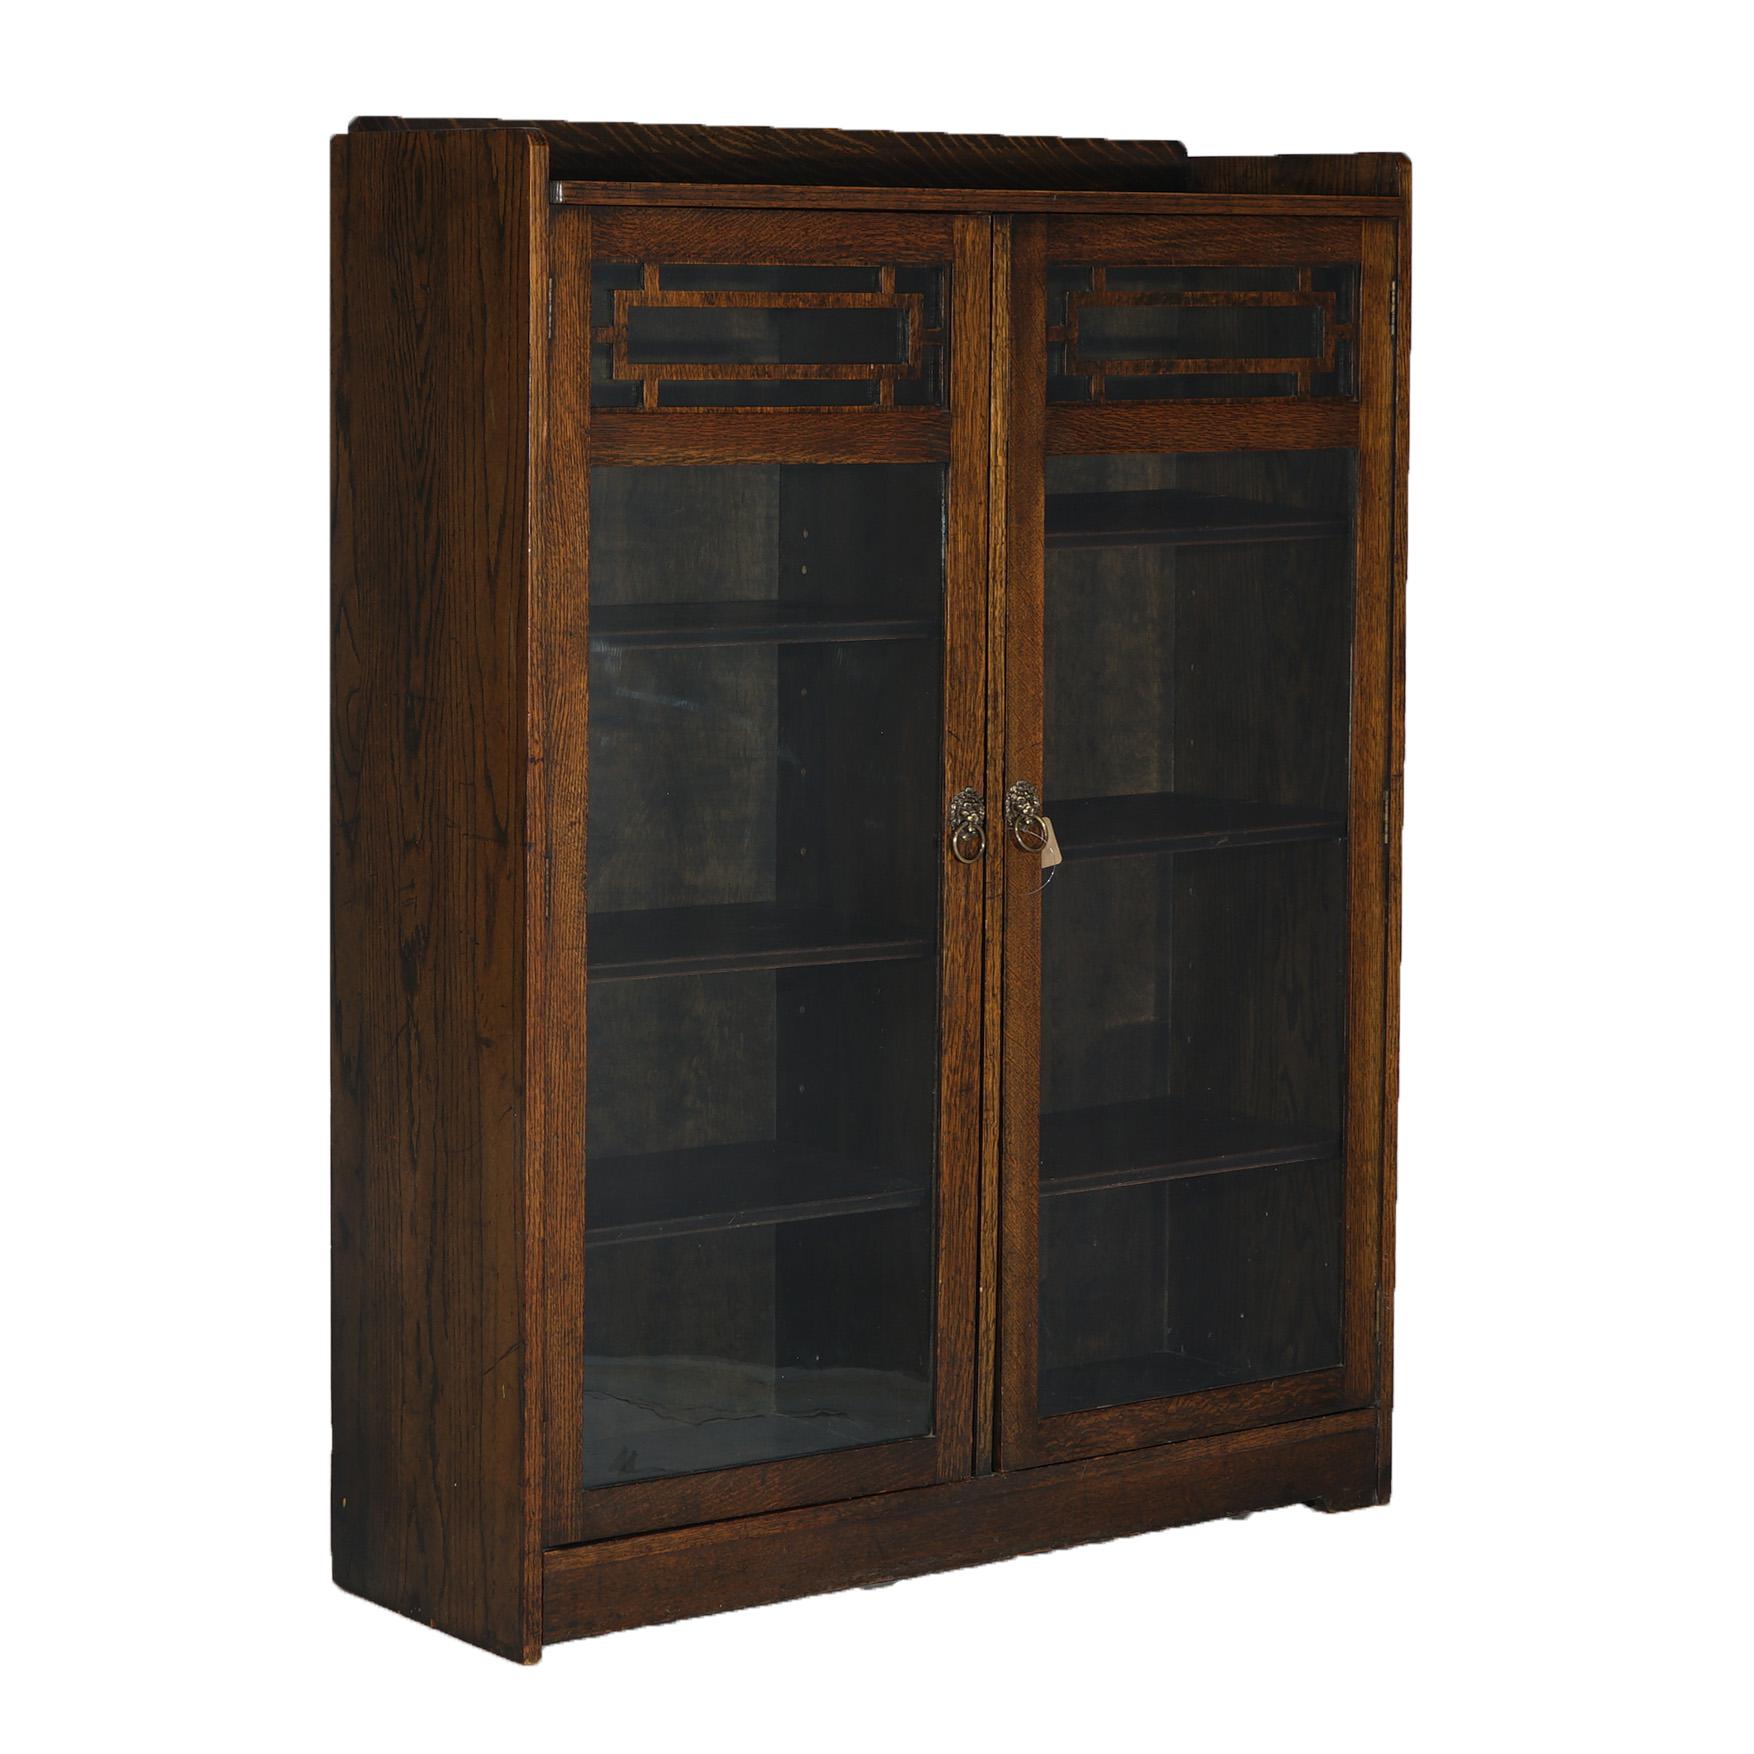 ***Ask About Lower In-House Shipping Rates - Reliable Service, Competitive Rates & Fully Insured***
An antique Arts and Crafts Mission bookcase in the manner of Stickley offers oak construction with upper gallery over case with double doors opening